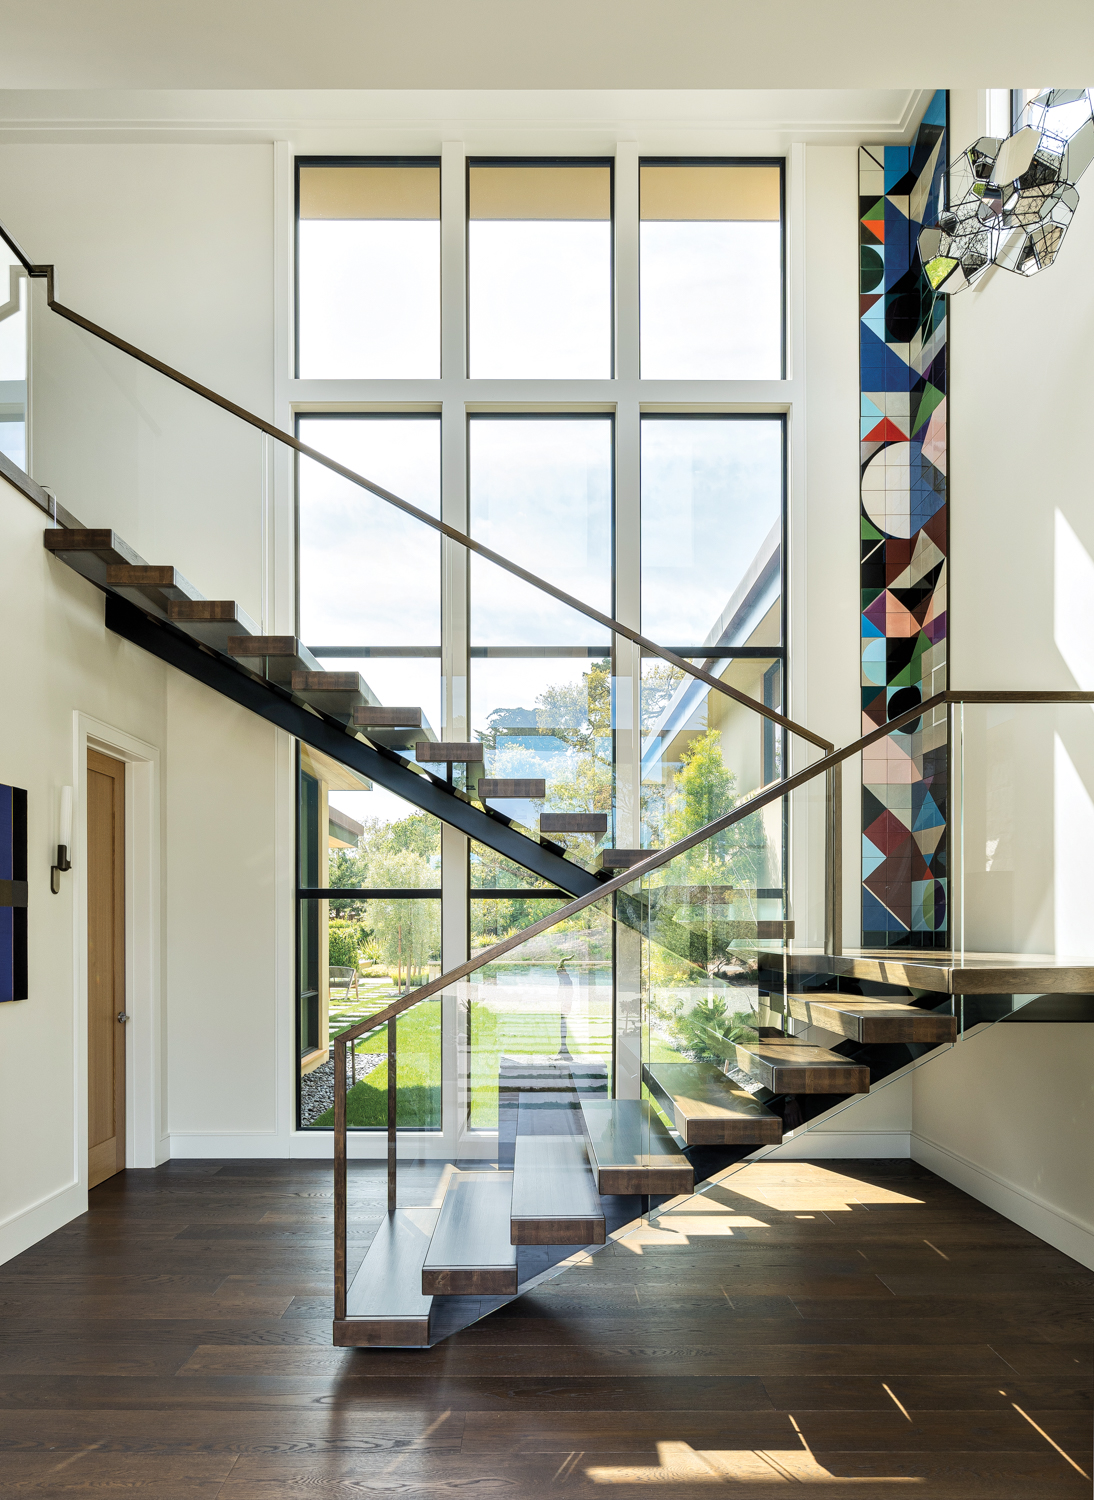 On this glass staircase, a...